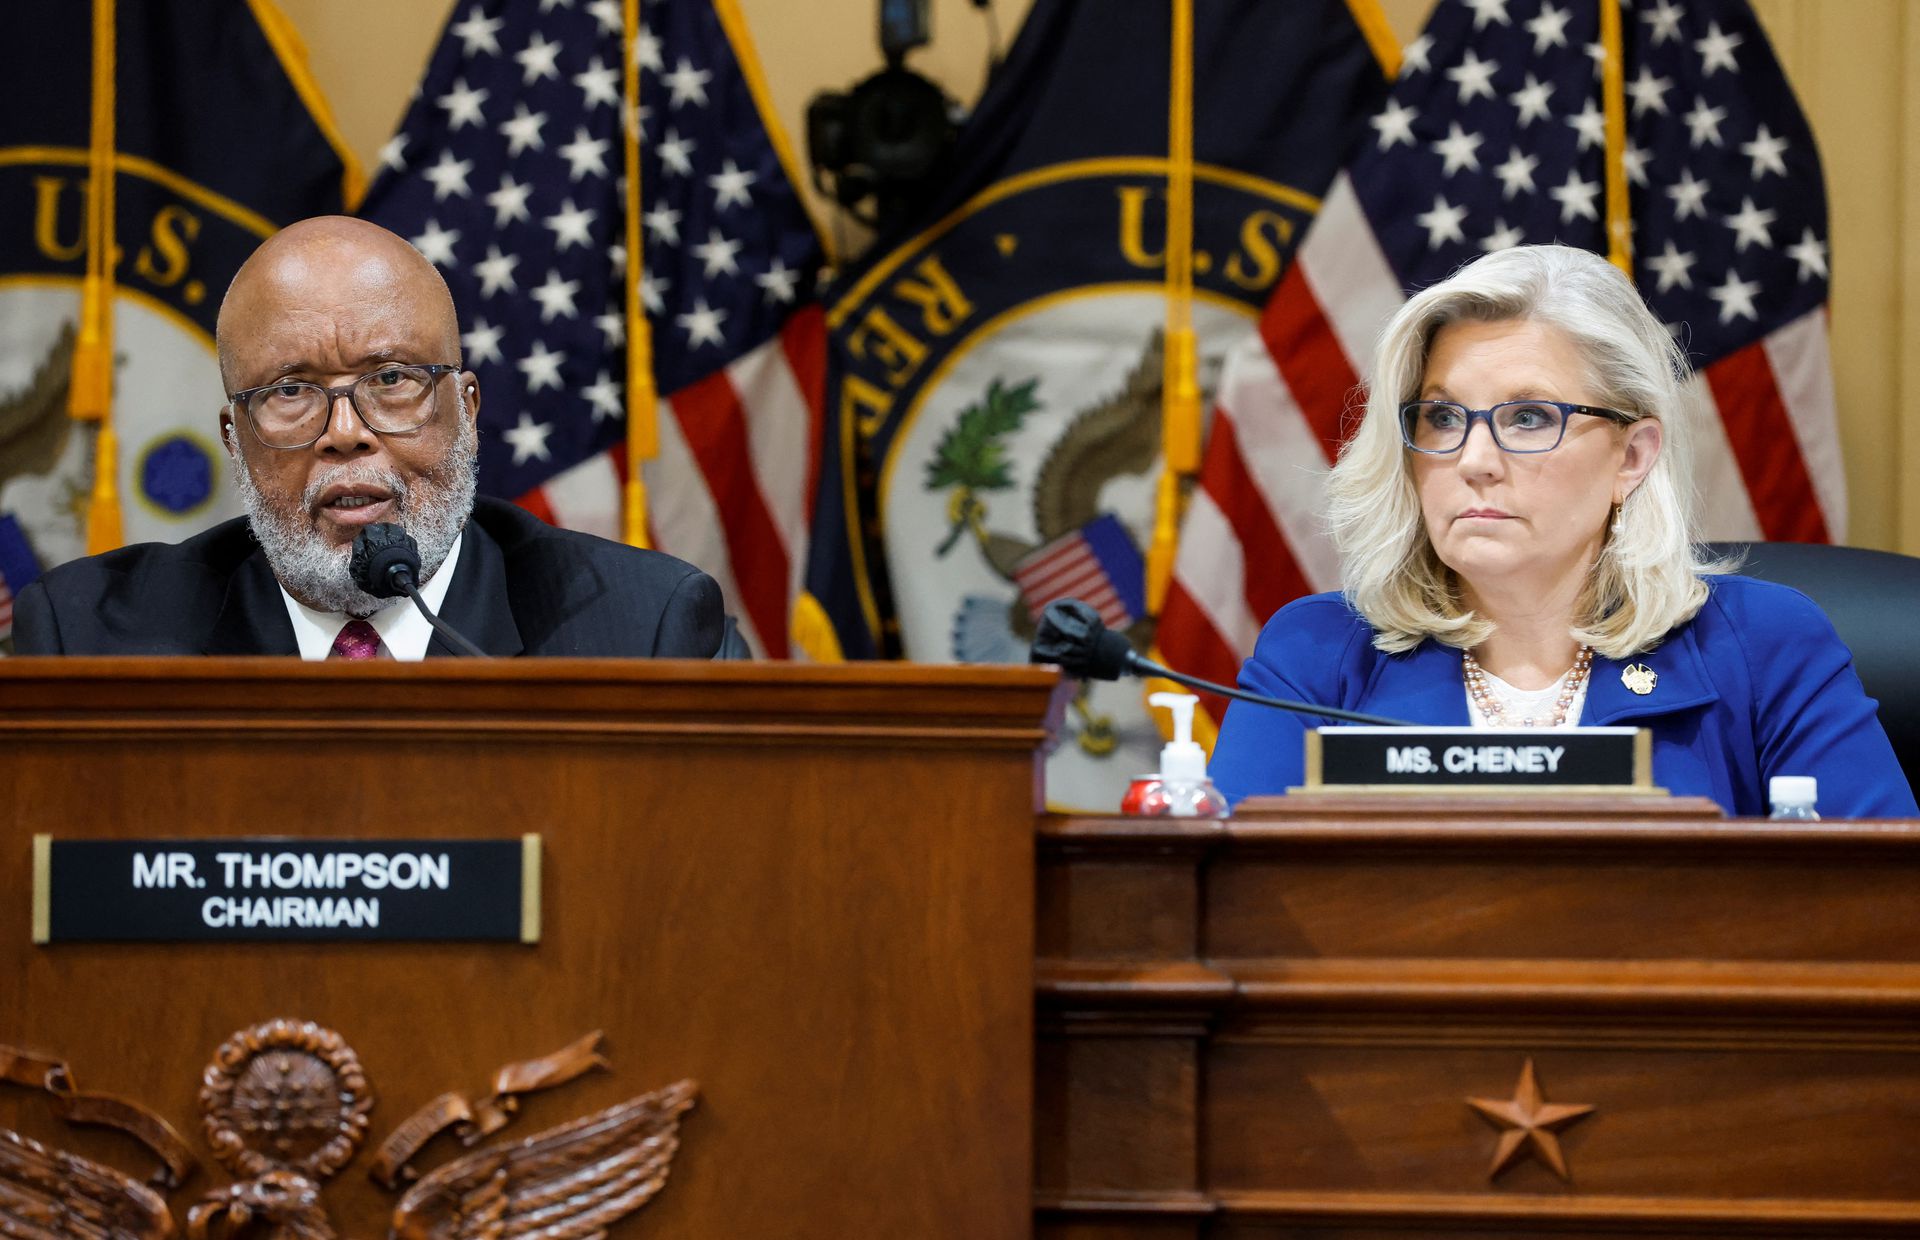 Committee Chairman Rep. Bennie Thompson (D-MS) speaks next to Vice Chair Rep. Liz Cheney (R-WY) during a public hearing of the U.S. House Select Committee to investigate the January 6 Attack on the U.S. Capitol, on Capitol Hill in Washington, U.S., October 13, 2022. REUTERS/Jonathan Ernst